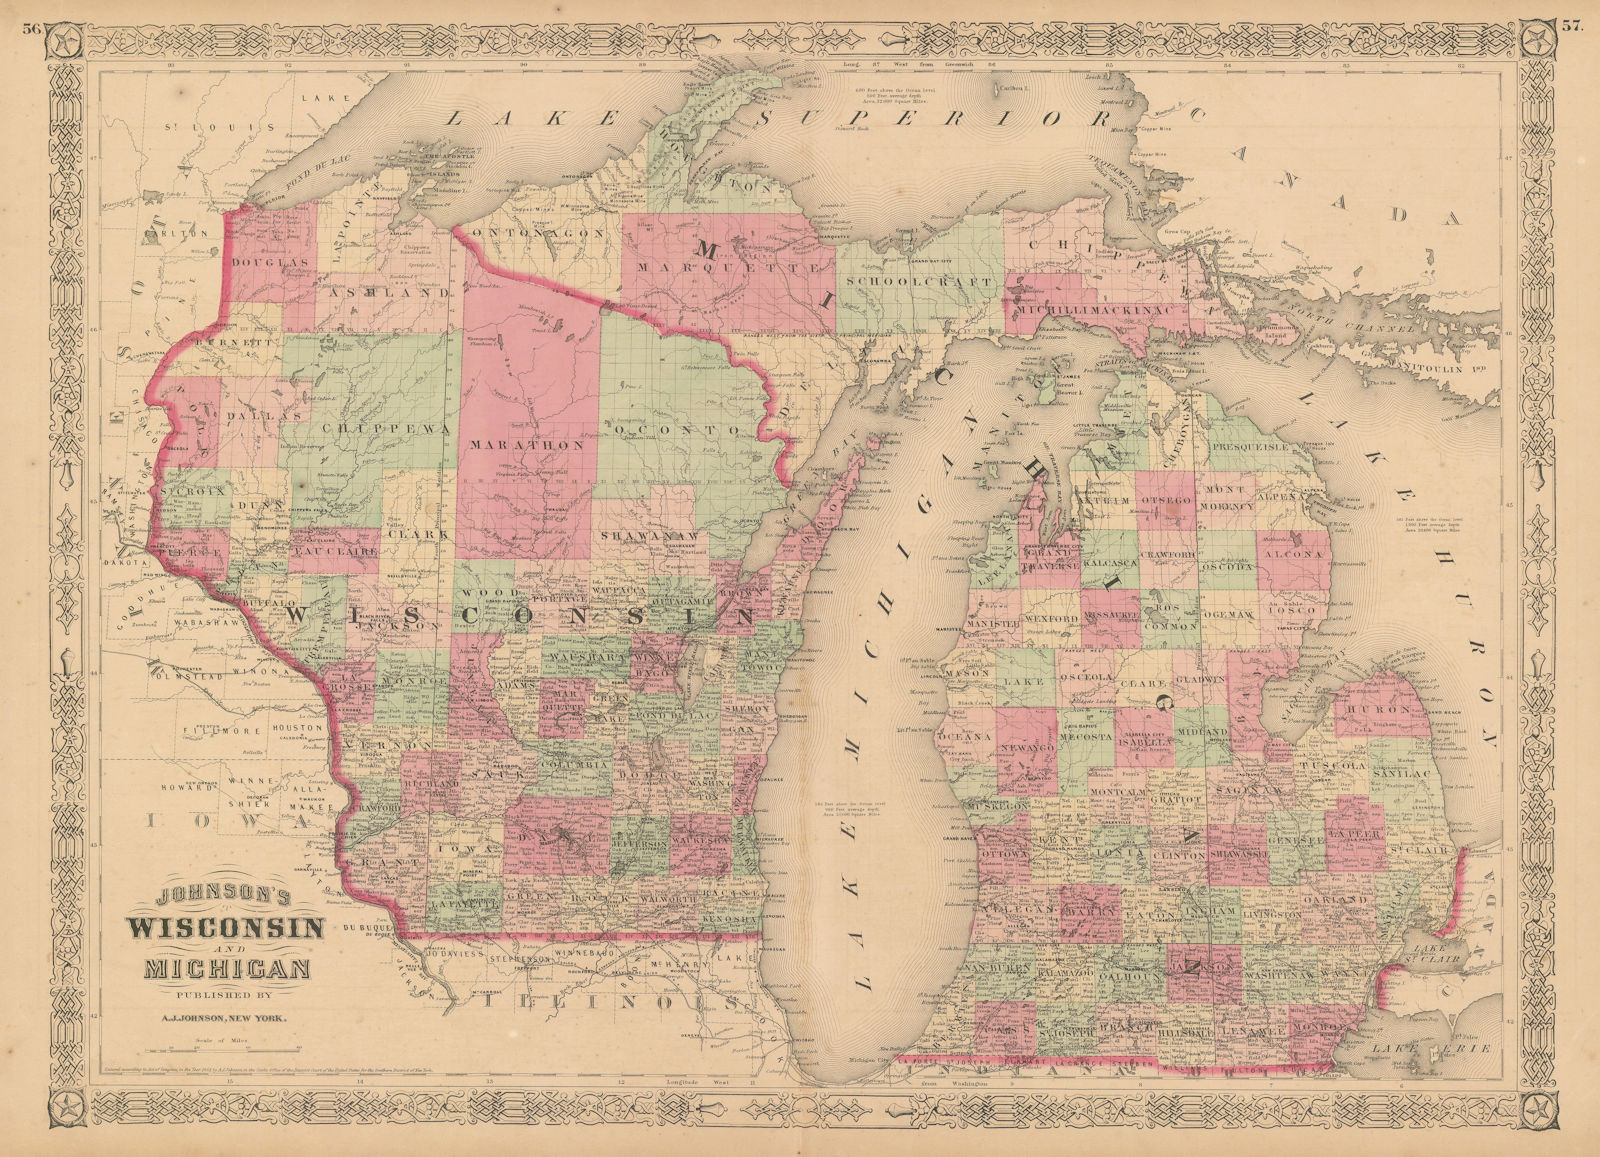 Johnson's Wisconsin & Michigan. State map showing counties. Great Lakes 1867